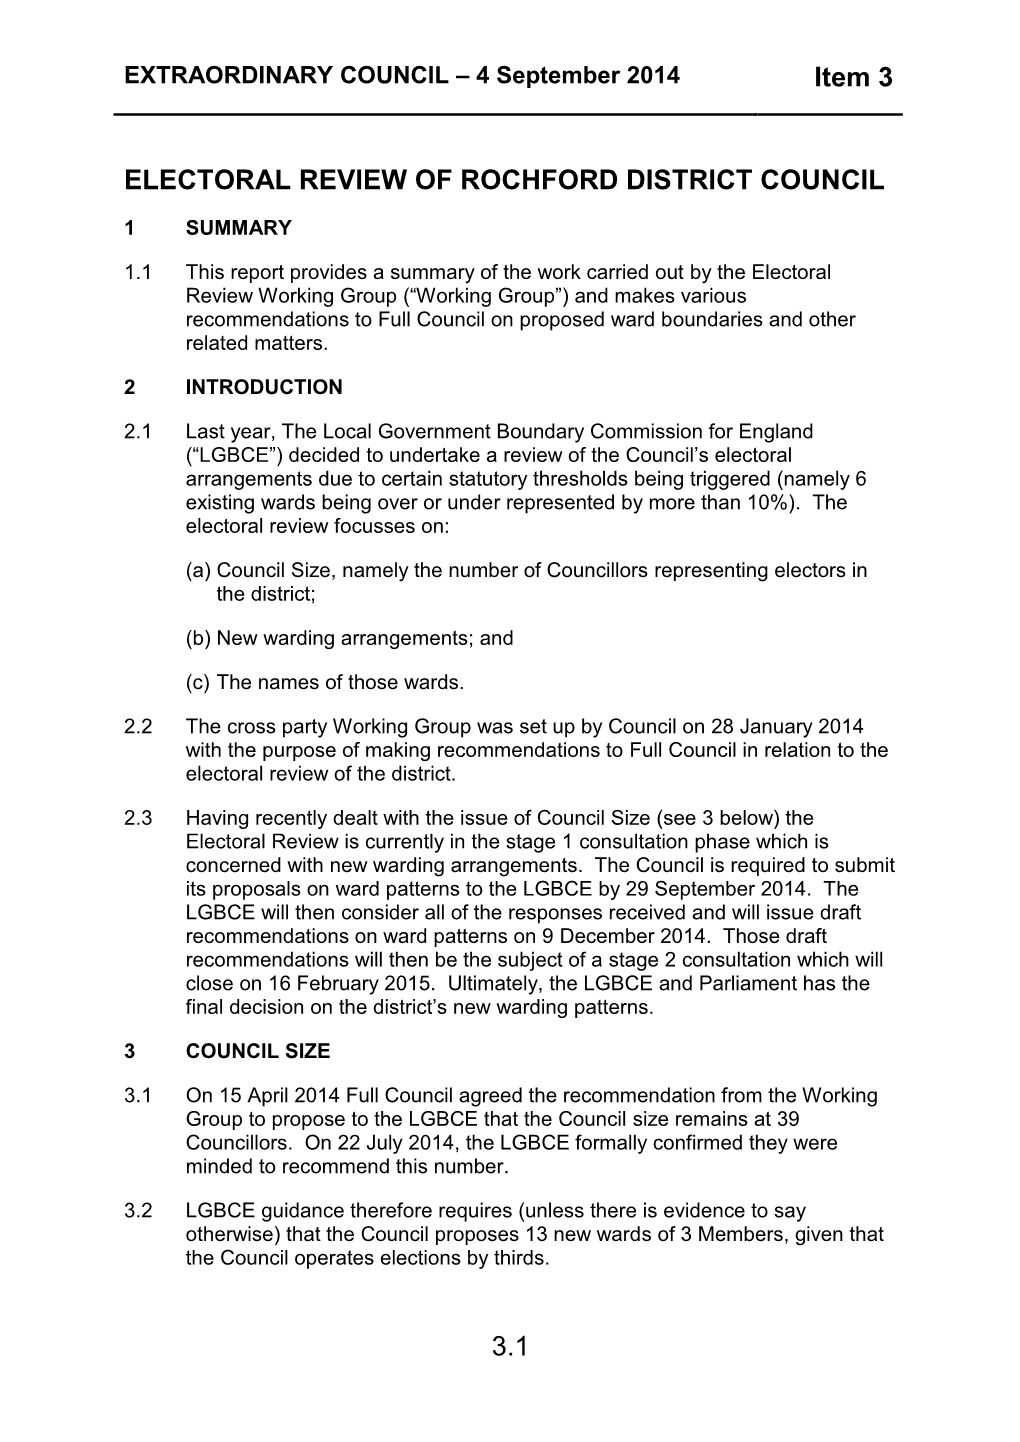 Item 3 Report; Electoral Review of Rochford District Council